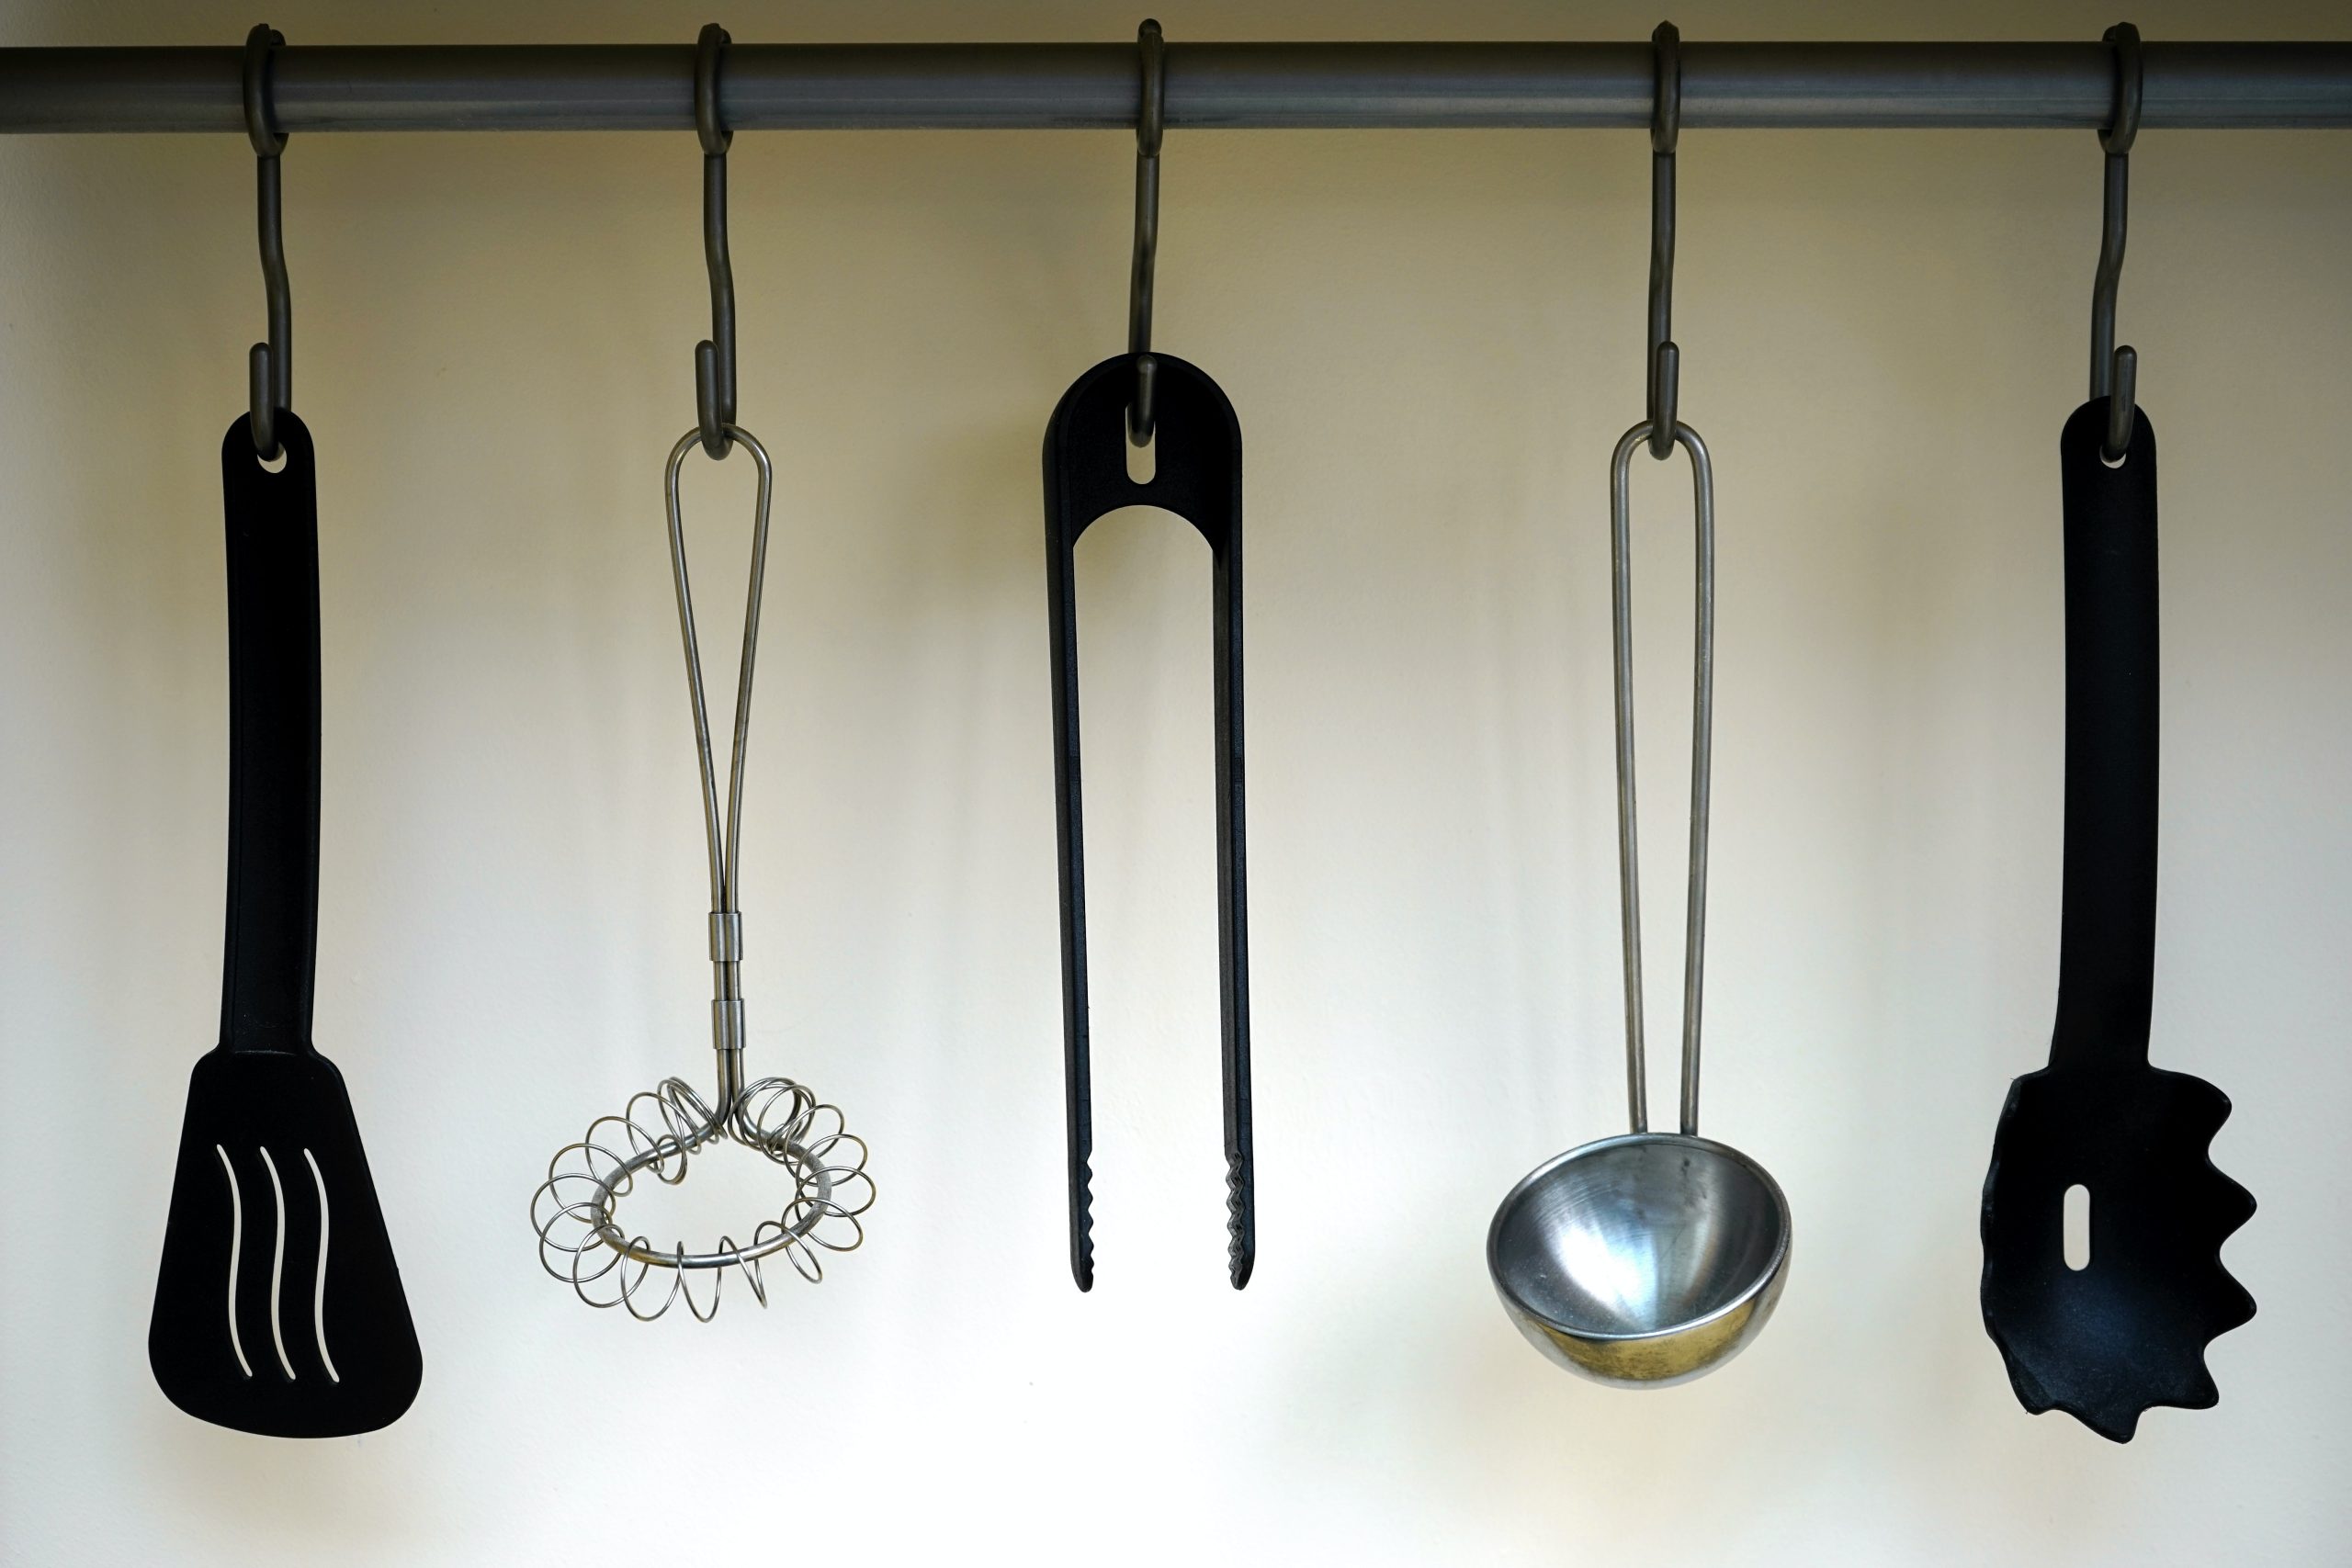 https://edsbred.com/wp-content/uploads/2022/07/utensils-for-cast-iron-pan-hanging-on-the-wall-scaled.jpg